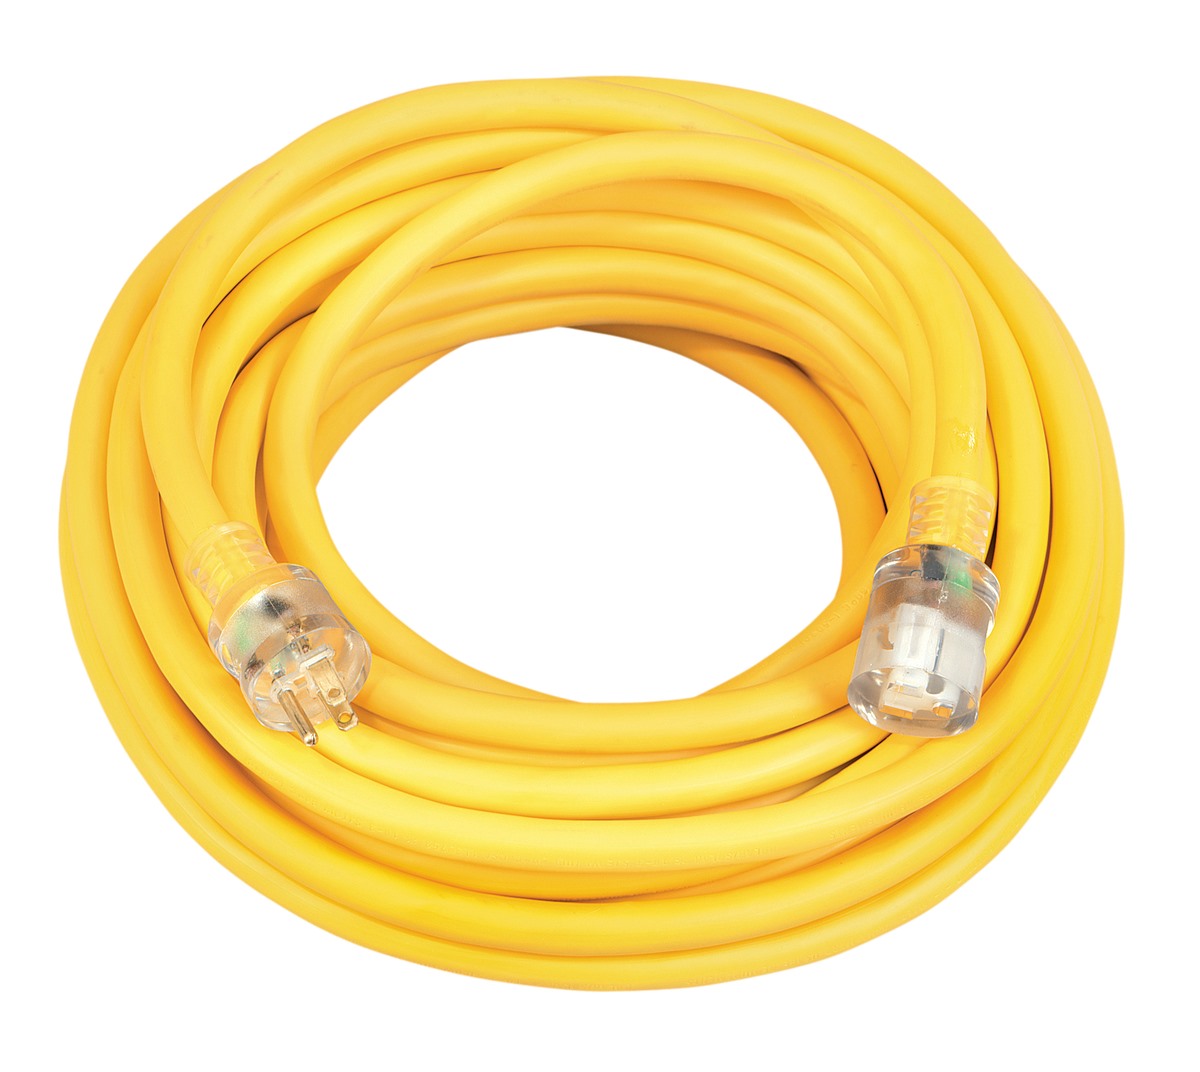 What Is An Electrical Cord?